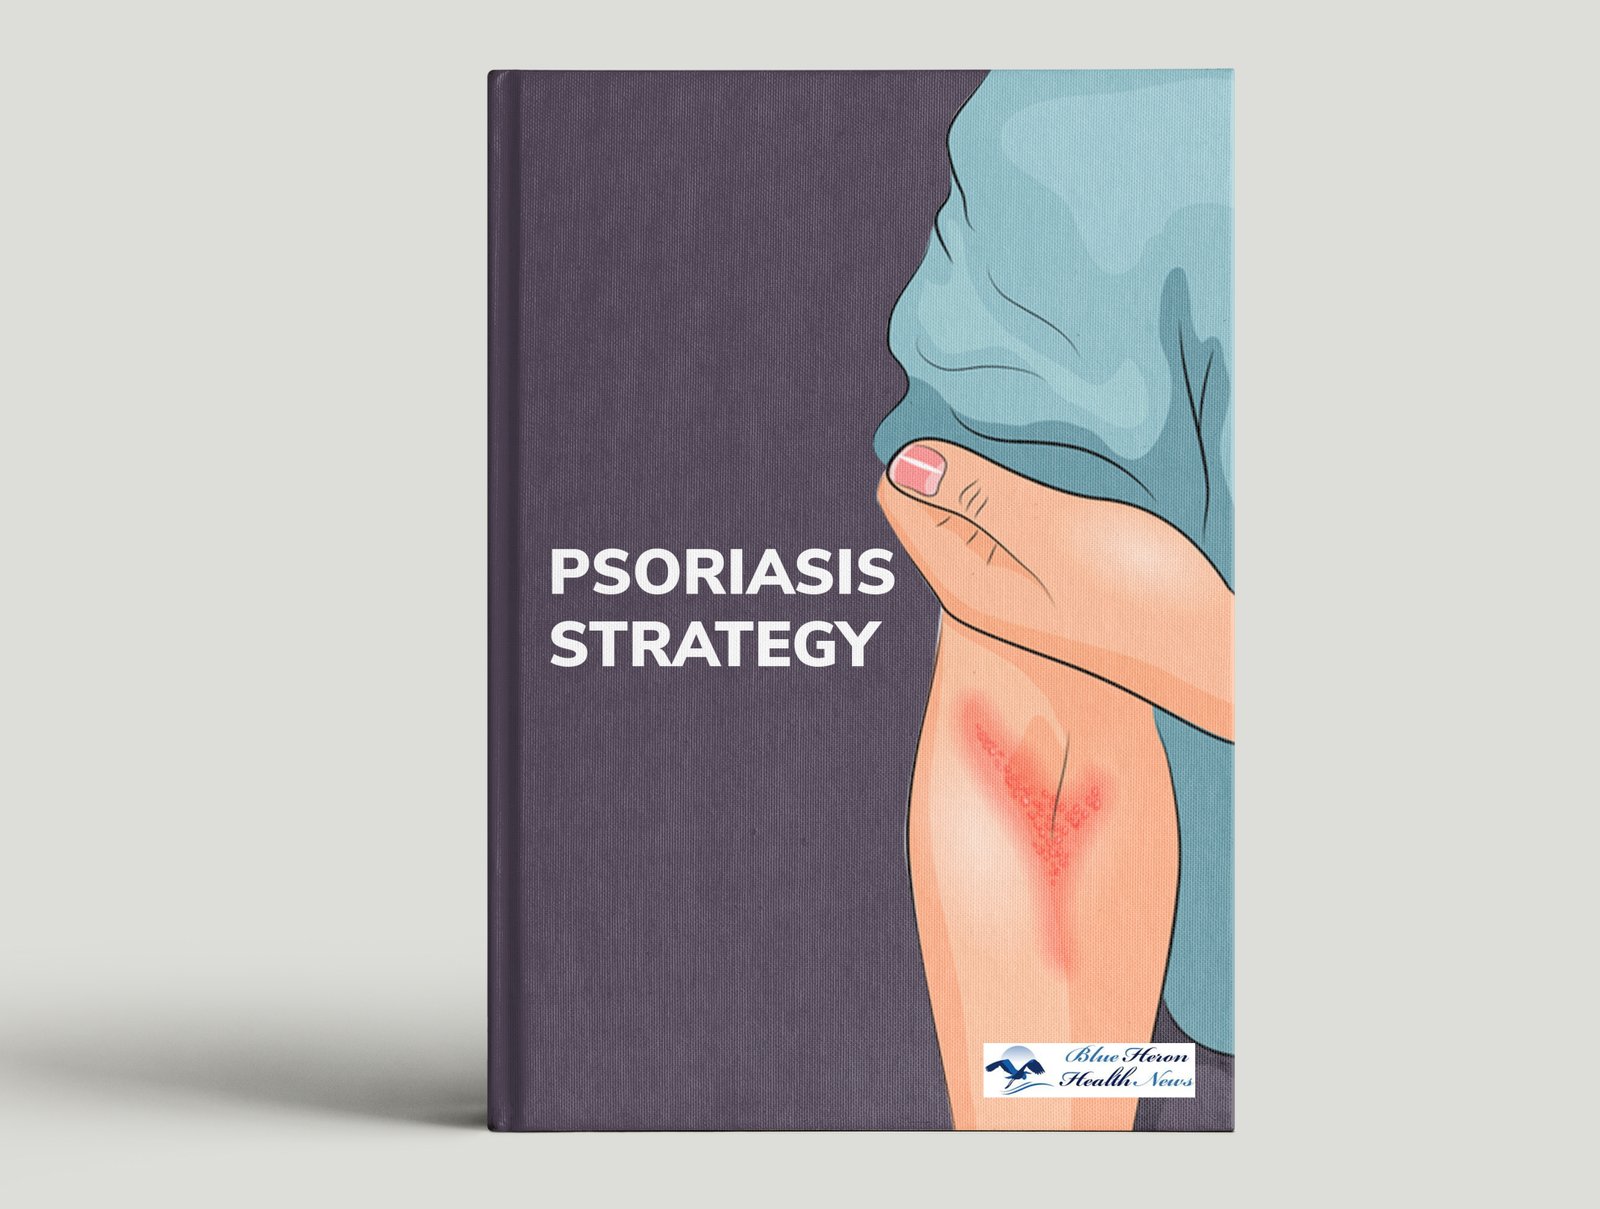 Psoriasis Strategy review